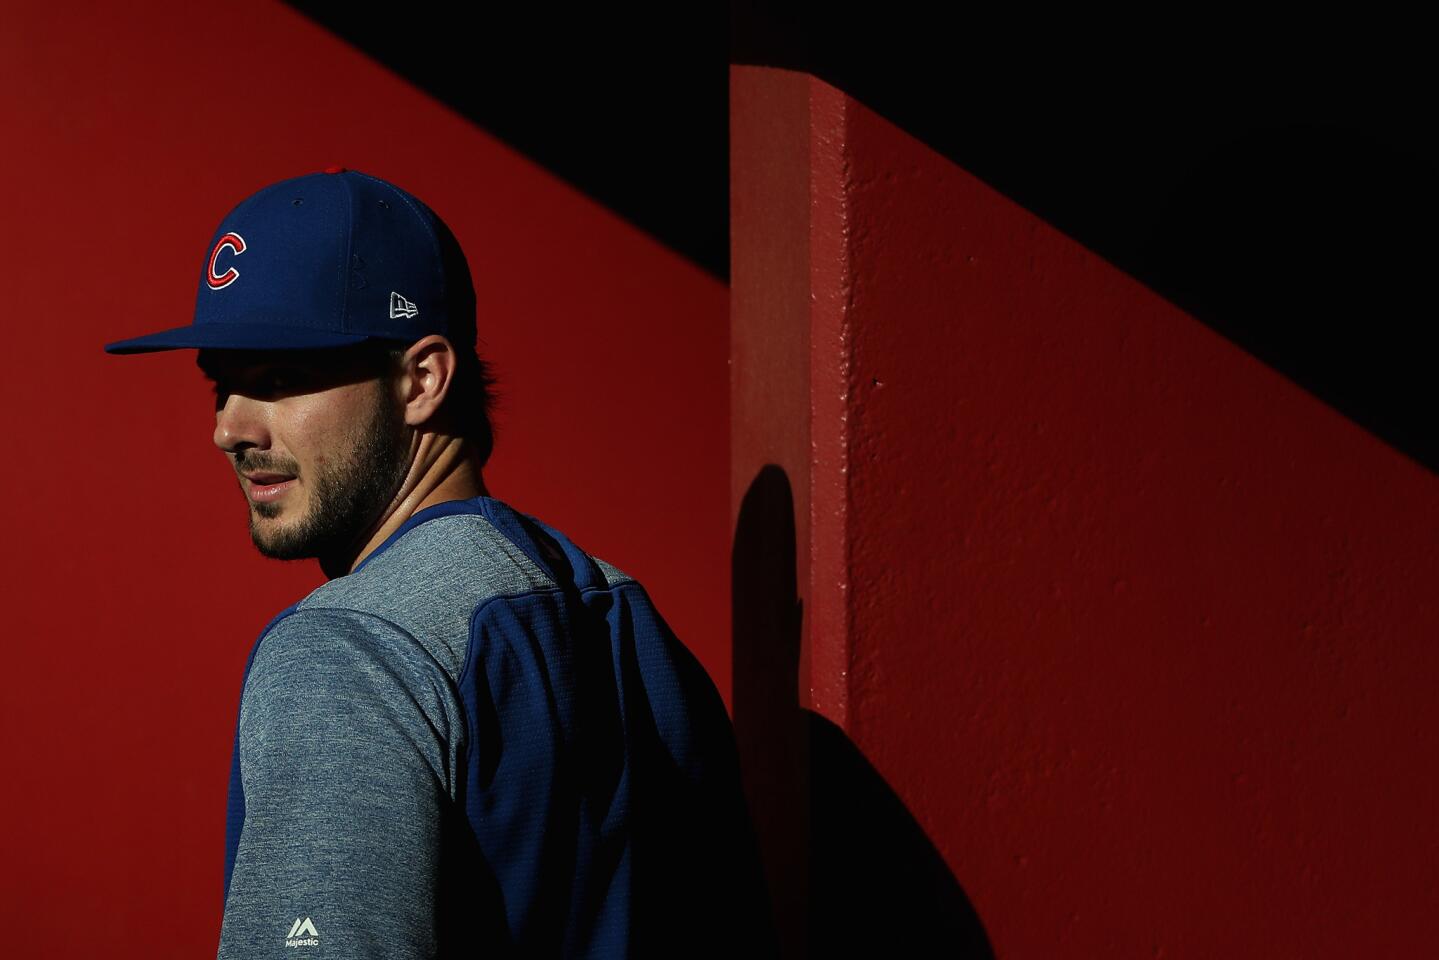 Kris Bryant walks in the dugout before a game against the Diamondbacks at Chase Field on Aug. 11, 2017 in Phoenix.